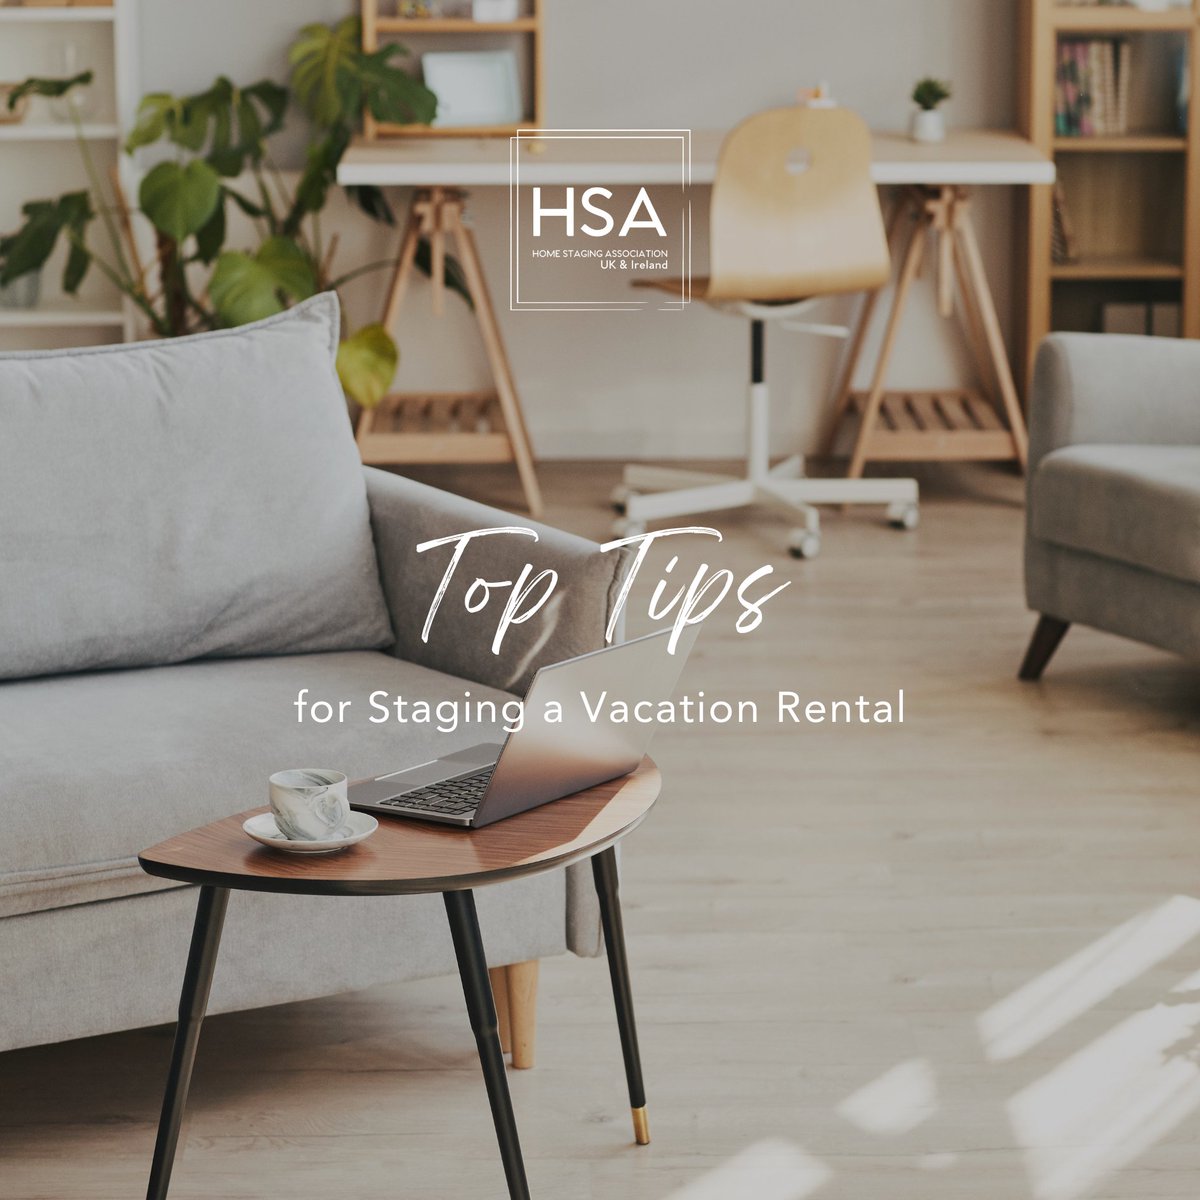 Creating a captivating and welcoming atmosphere is crucial when it comes to staging a vacation rental. Check out our tips by visiting our Facebook and Instagram pages!

#homestagingtips #homestagingbusiness #shorttermrentals #stagingvacationrentals #homestaginguk #hsauk